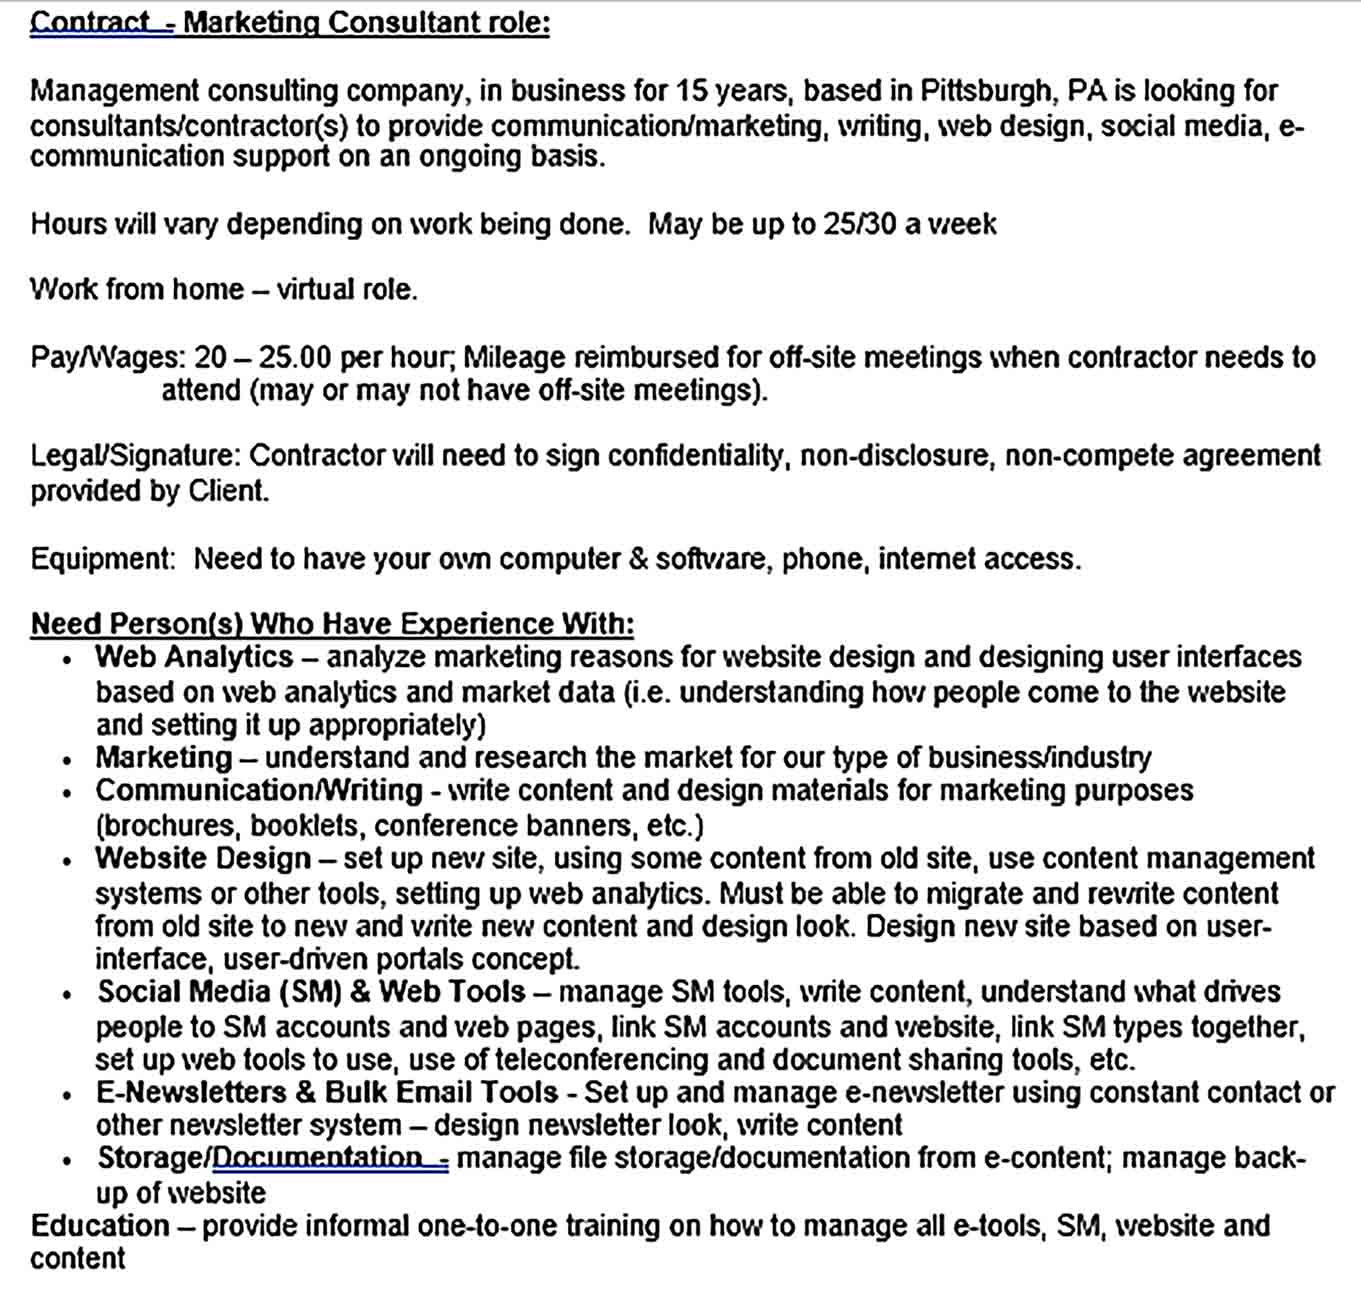 Sample Contractor Confidentiality Agreement for Marketing Contractor